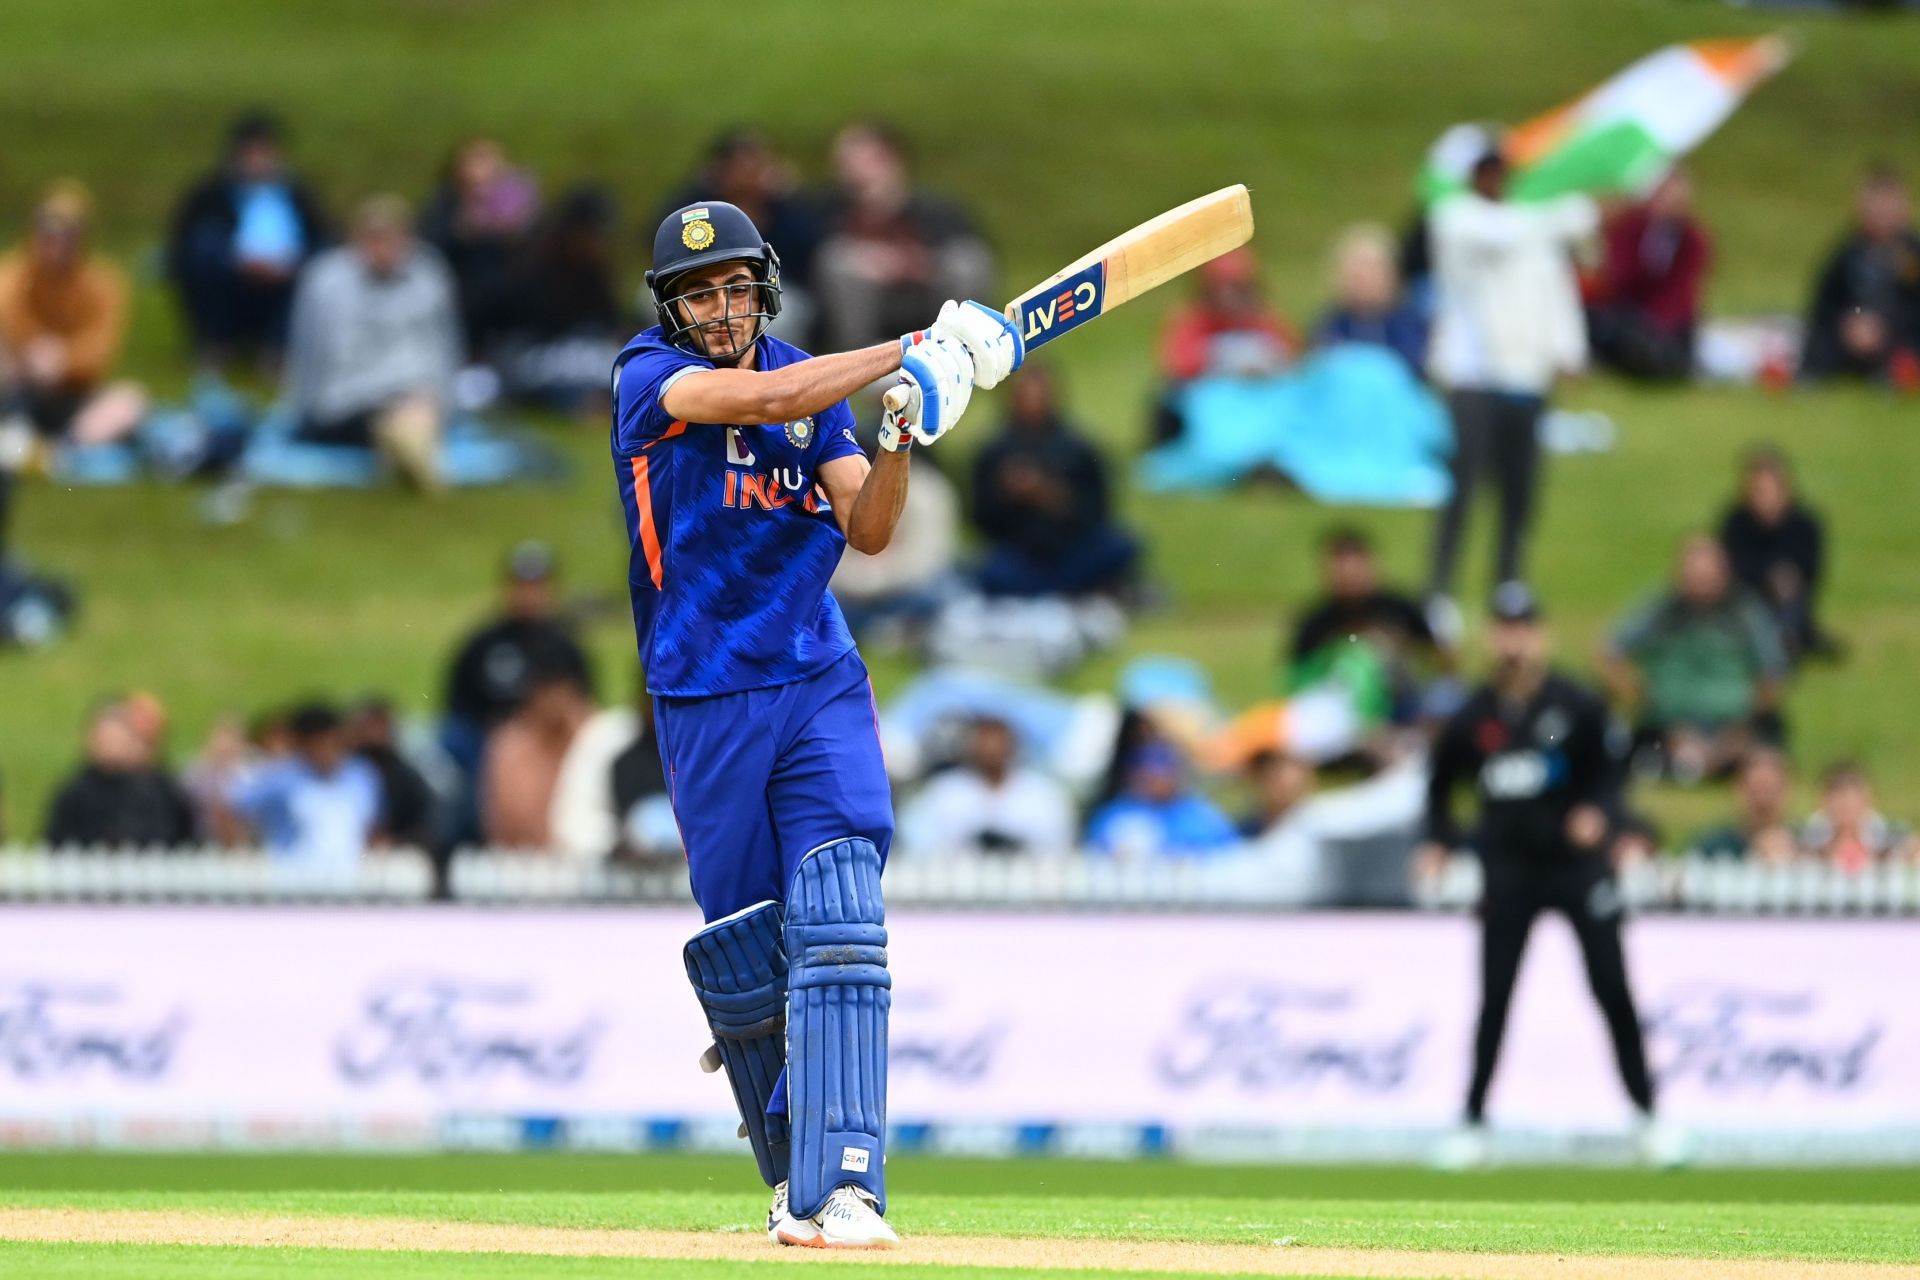 Shubman Gill has been a consistent performer at the top of the order in ODI cricket.